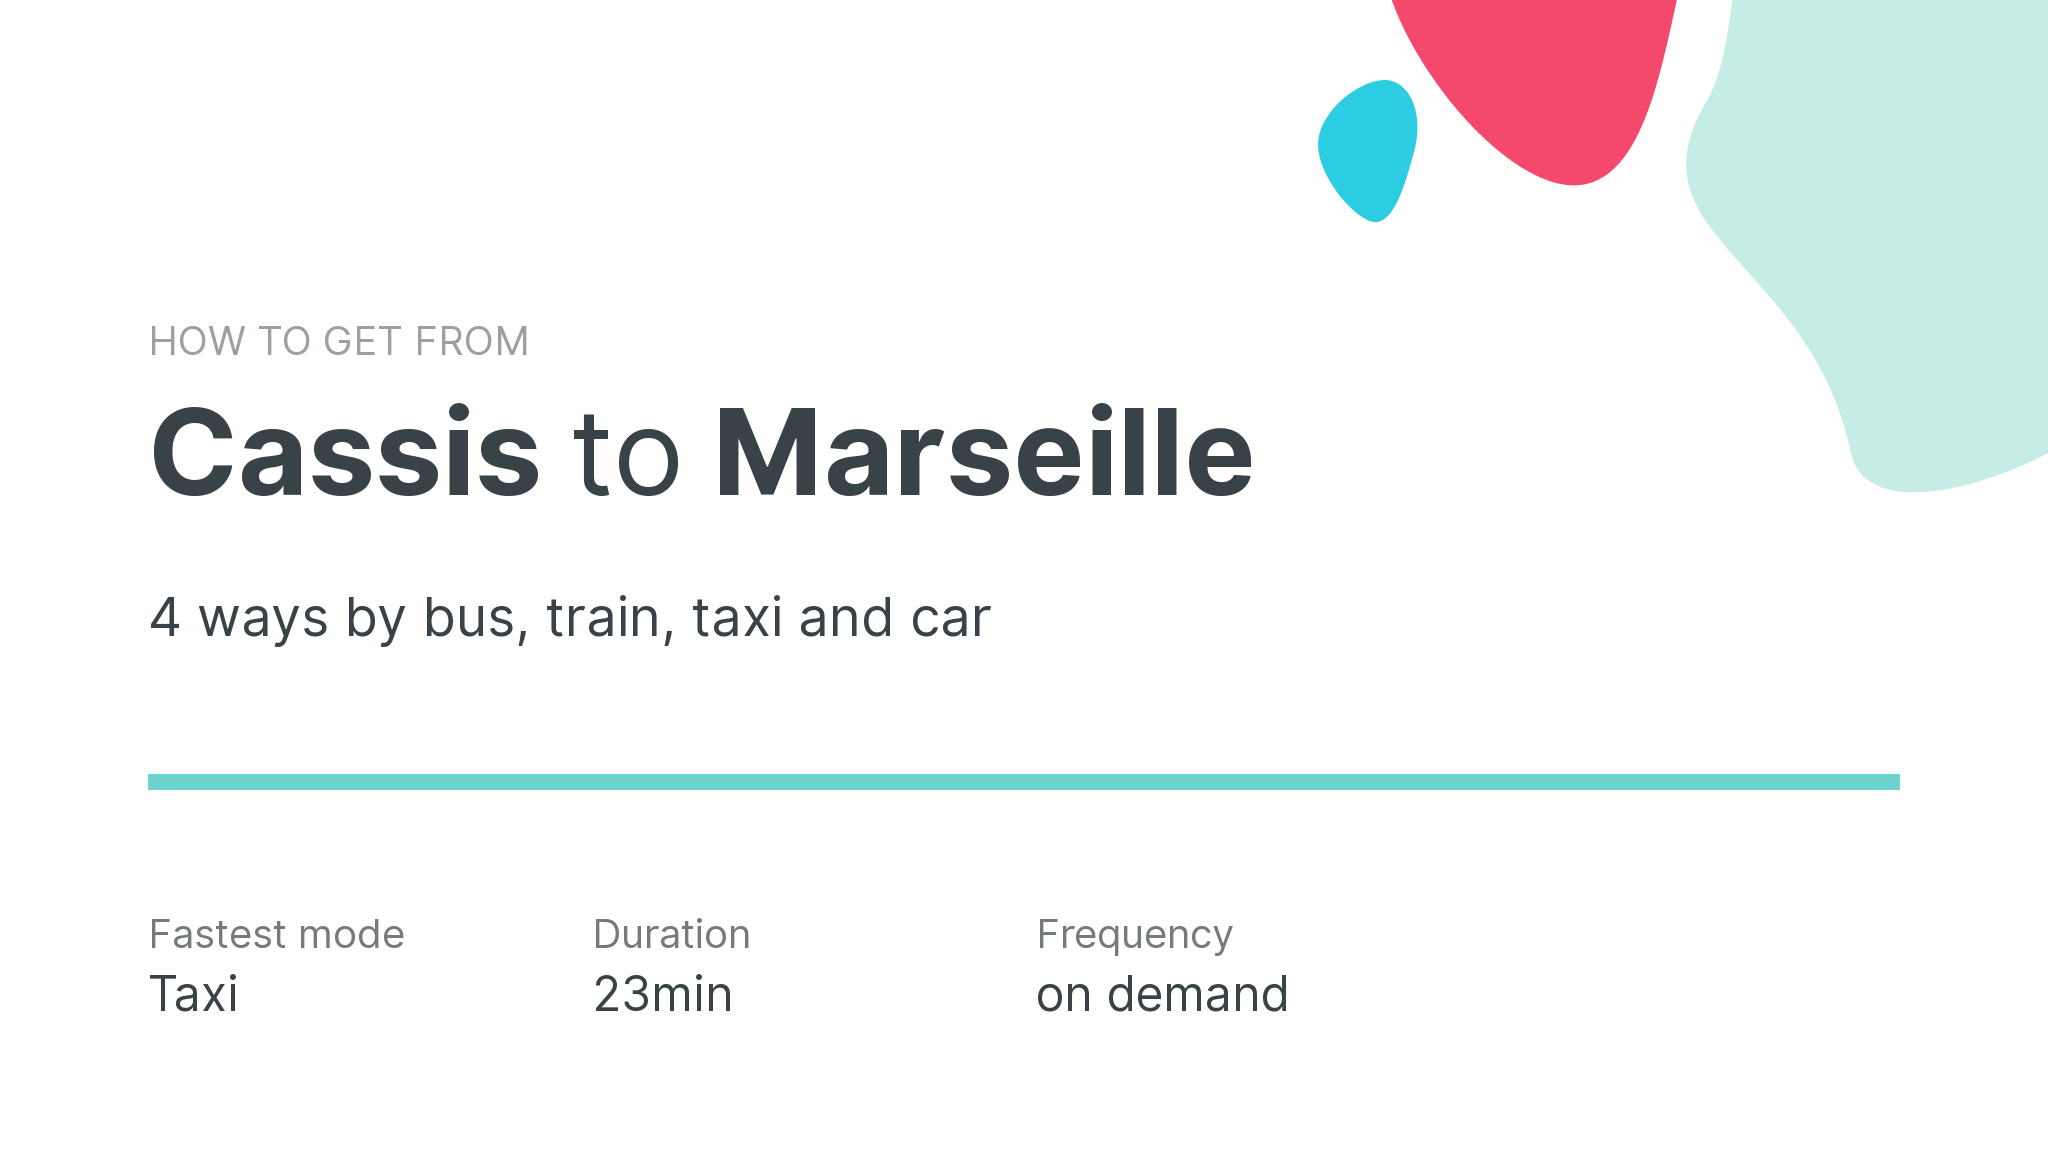 How do I get from Cassis to Marseille